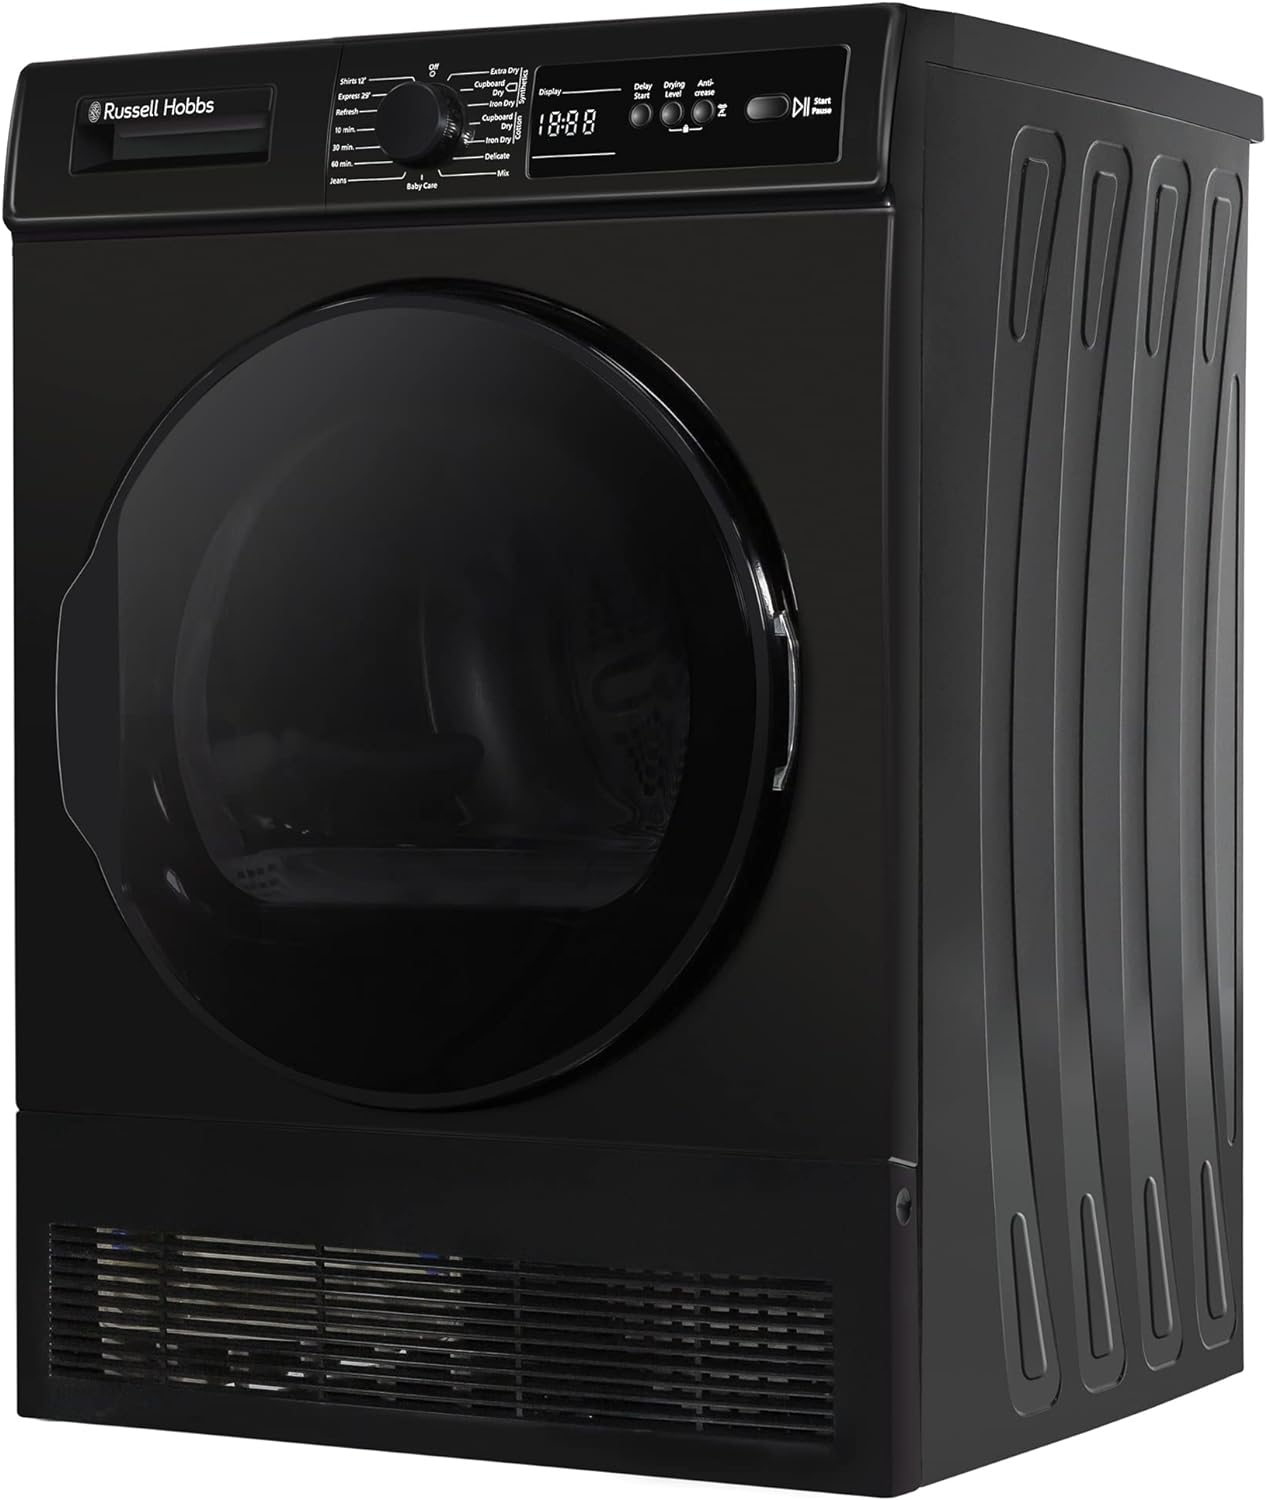 Russell Hobbs Freestanding Condenser Dryer Electric Tumble Dryer 15 Programmes 8kg Capacity 3 Heat Settings LED Display DelayStart Anti - Crease Child Lock Black Clothes Dryer RH8CTD111B - Amazing Gadgets Outlet